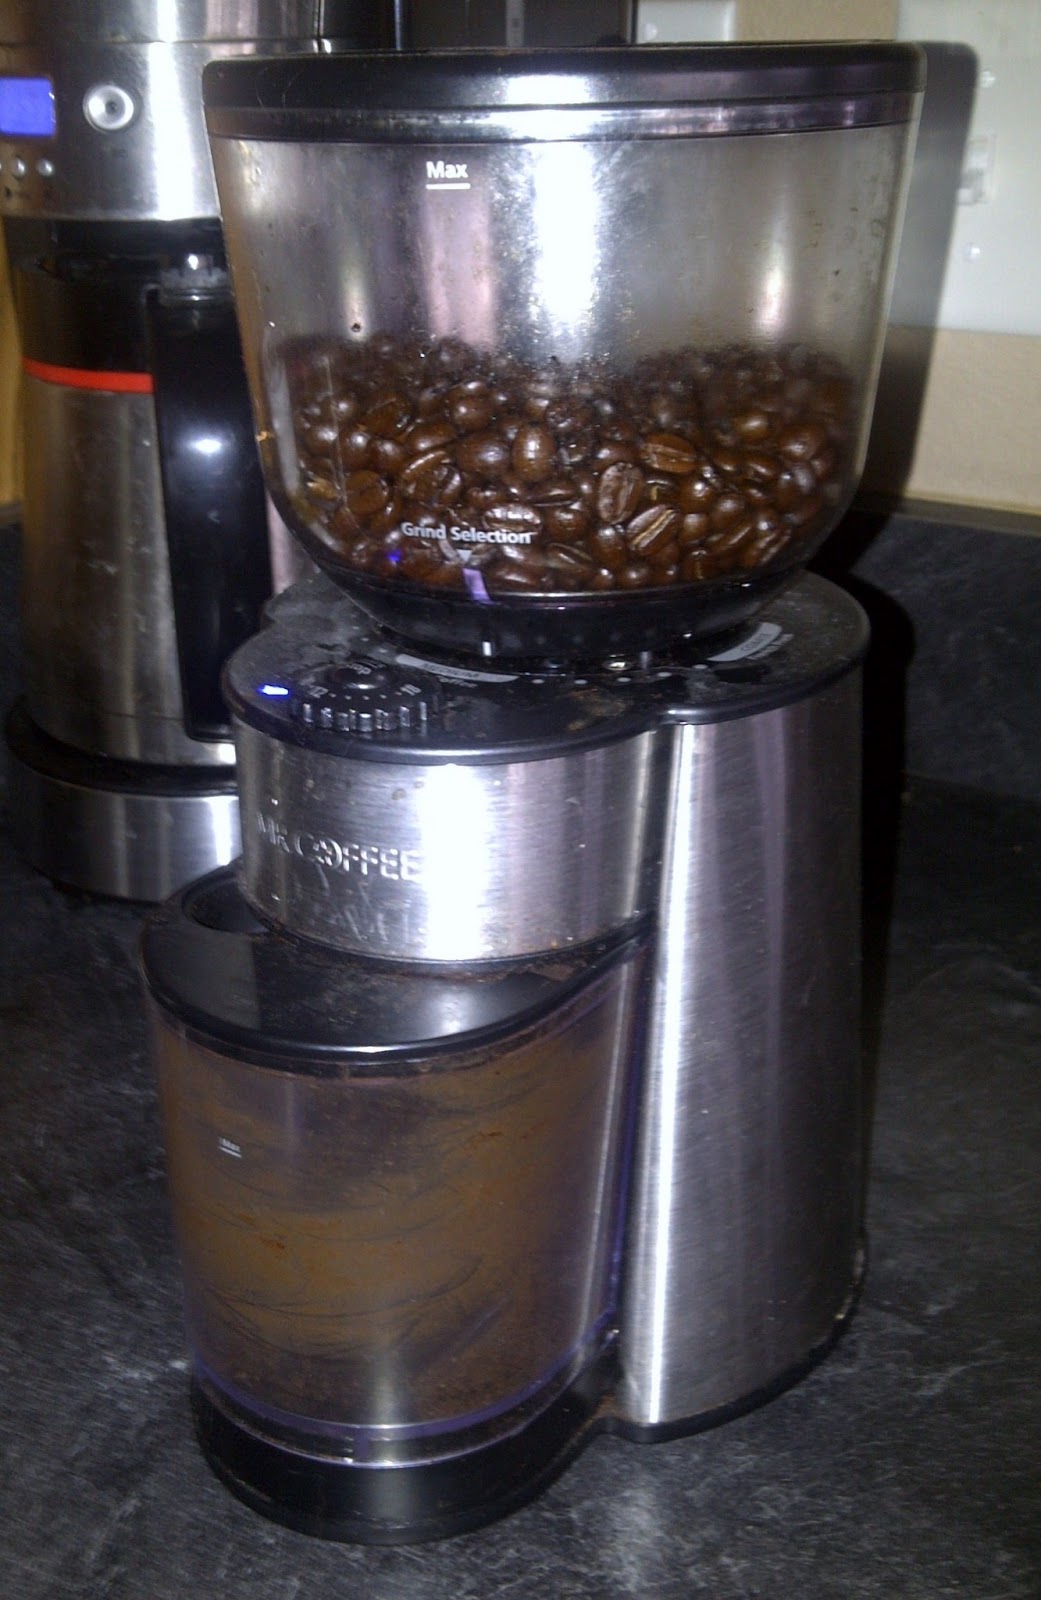 Mr. Coffee 12 Cup Automatic Burr Coffee Grinder